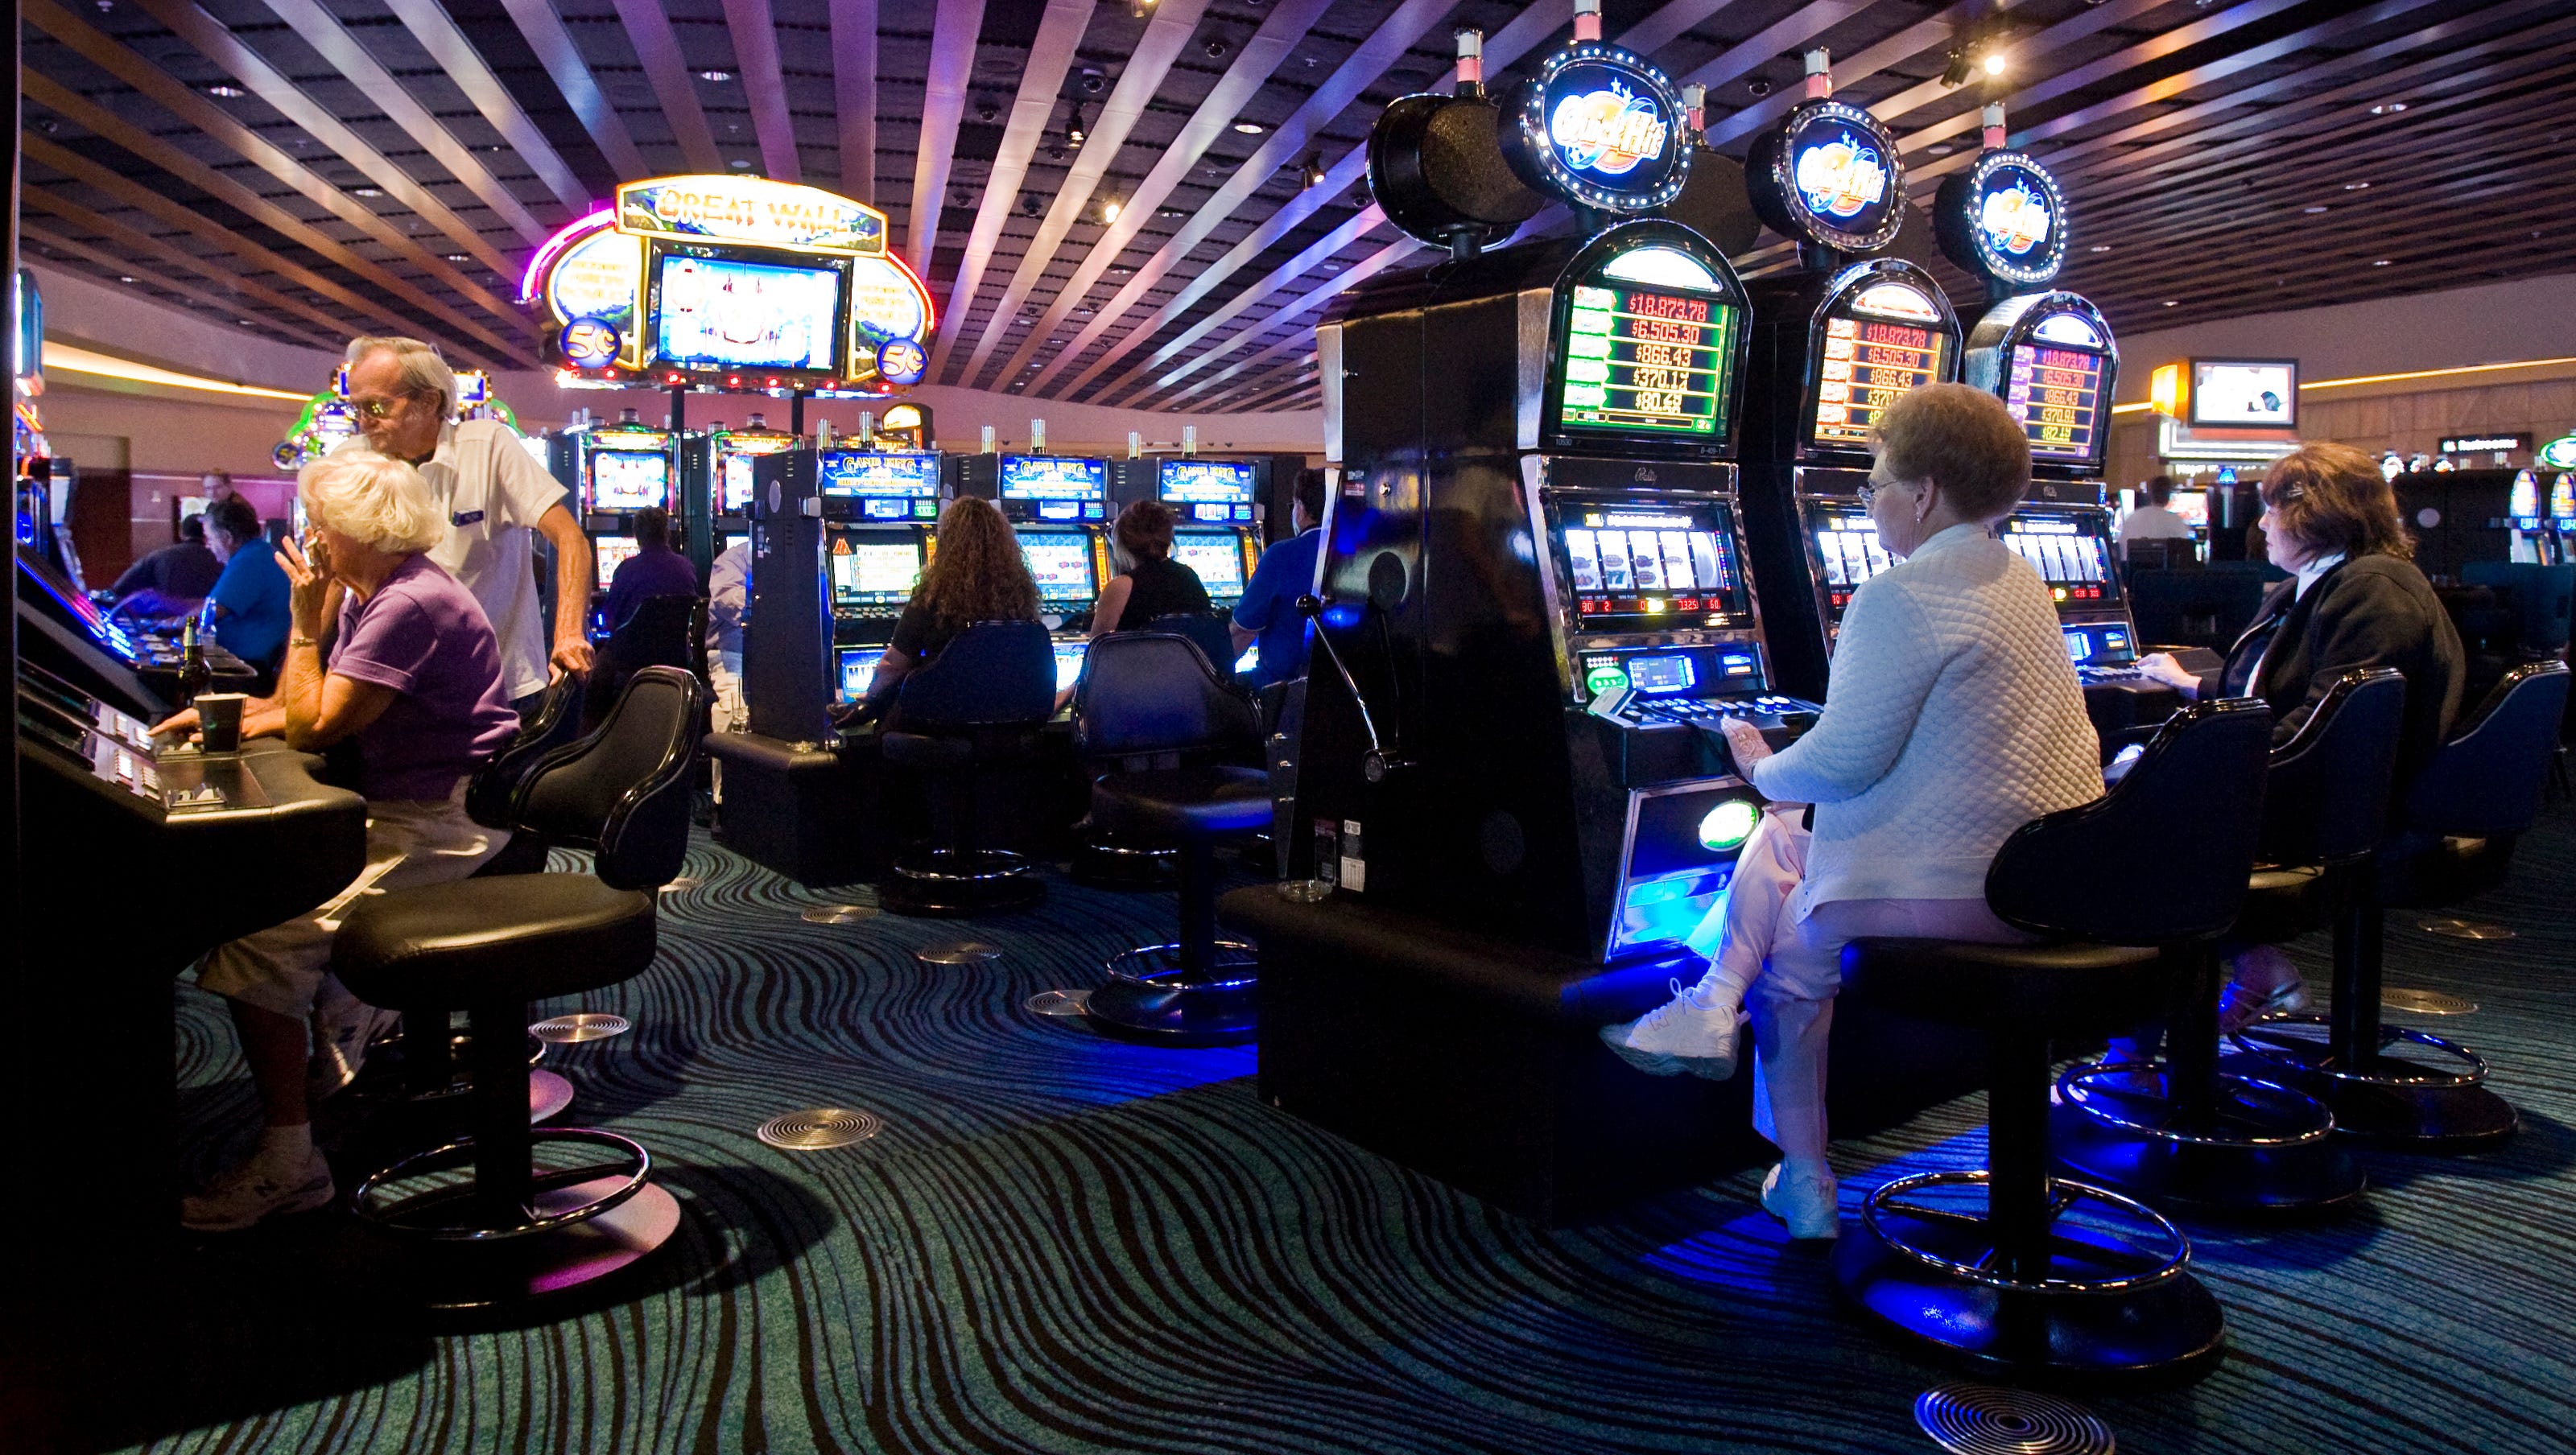 10 best casinos in to play and stay! Vee Quiva, Del Sol and more.